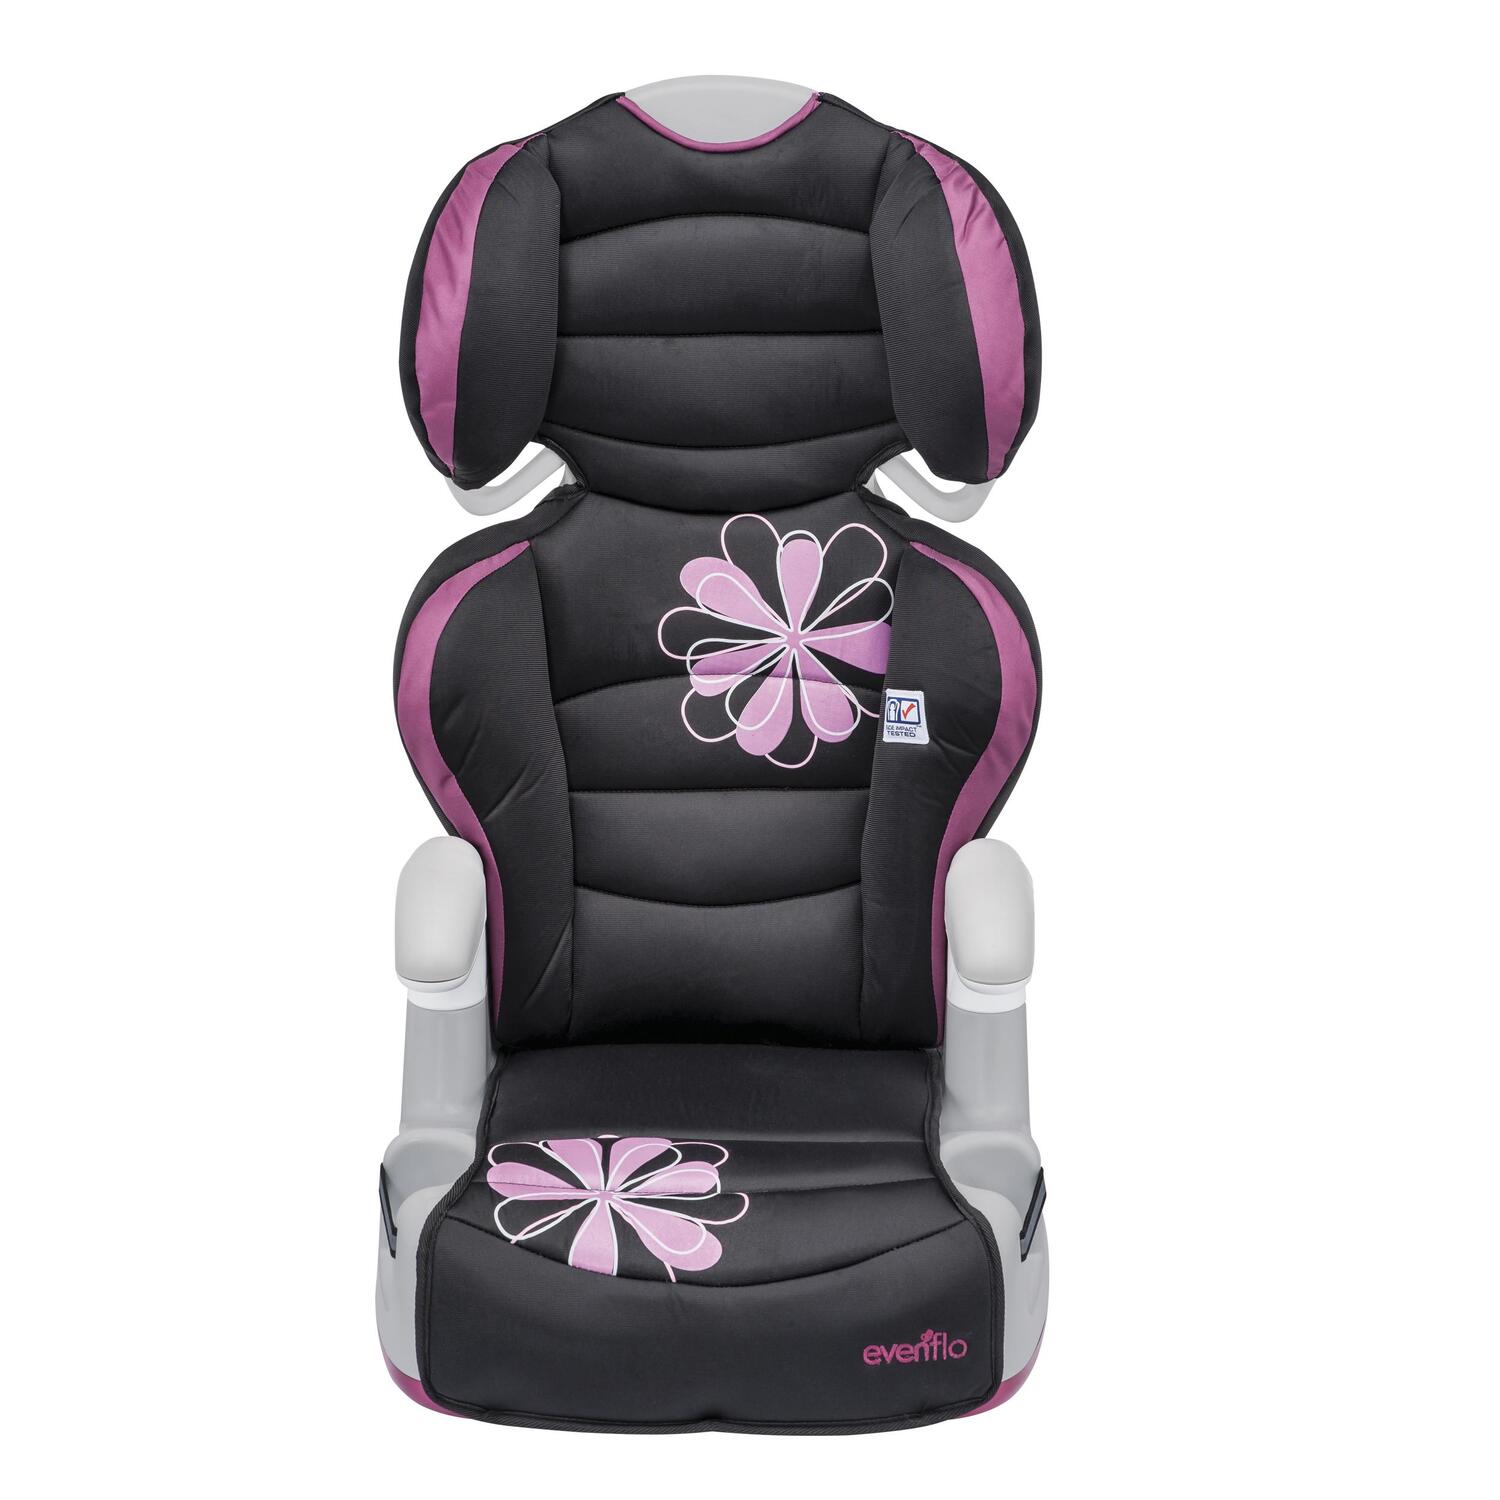 Evenflo Big Kid LX High Back Booster Car Seat, Carrissa - image 5 of 5